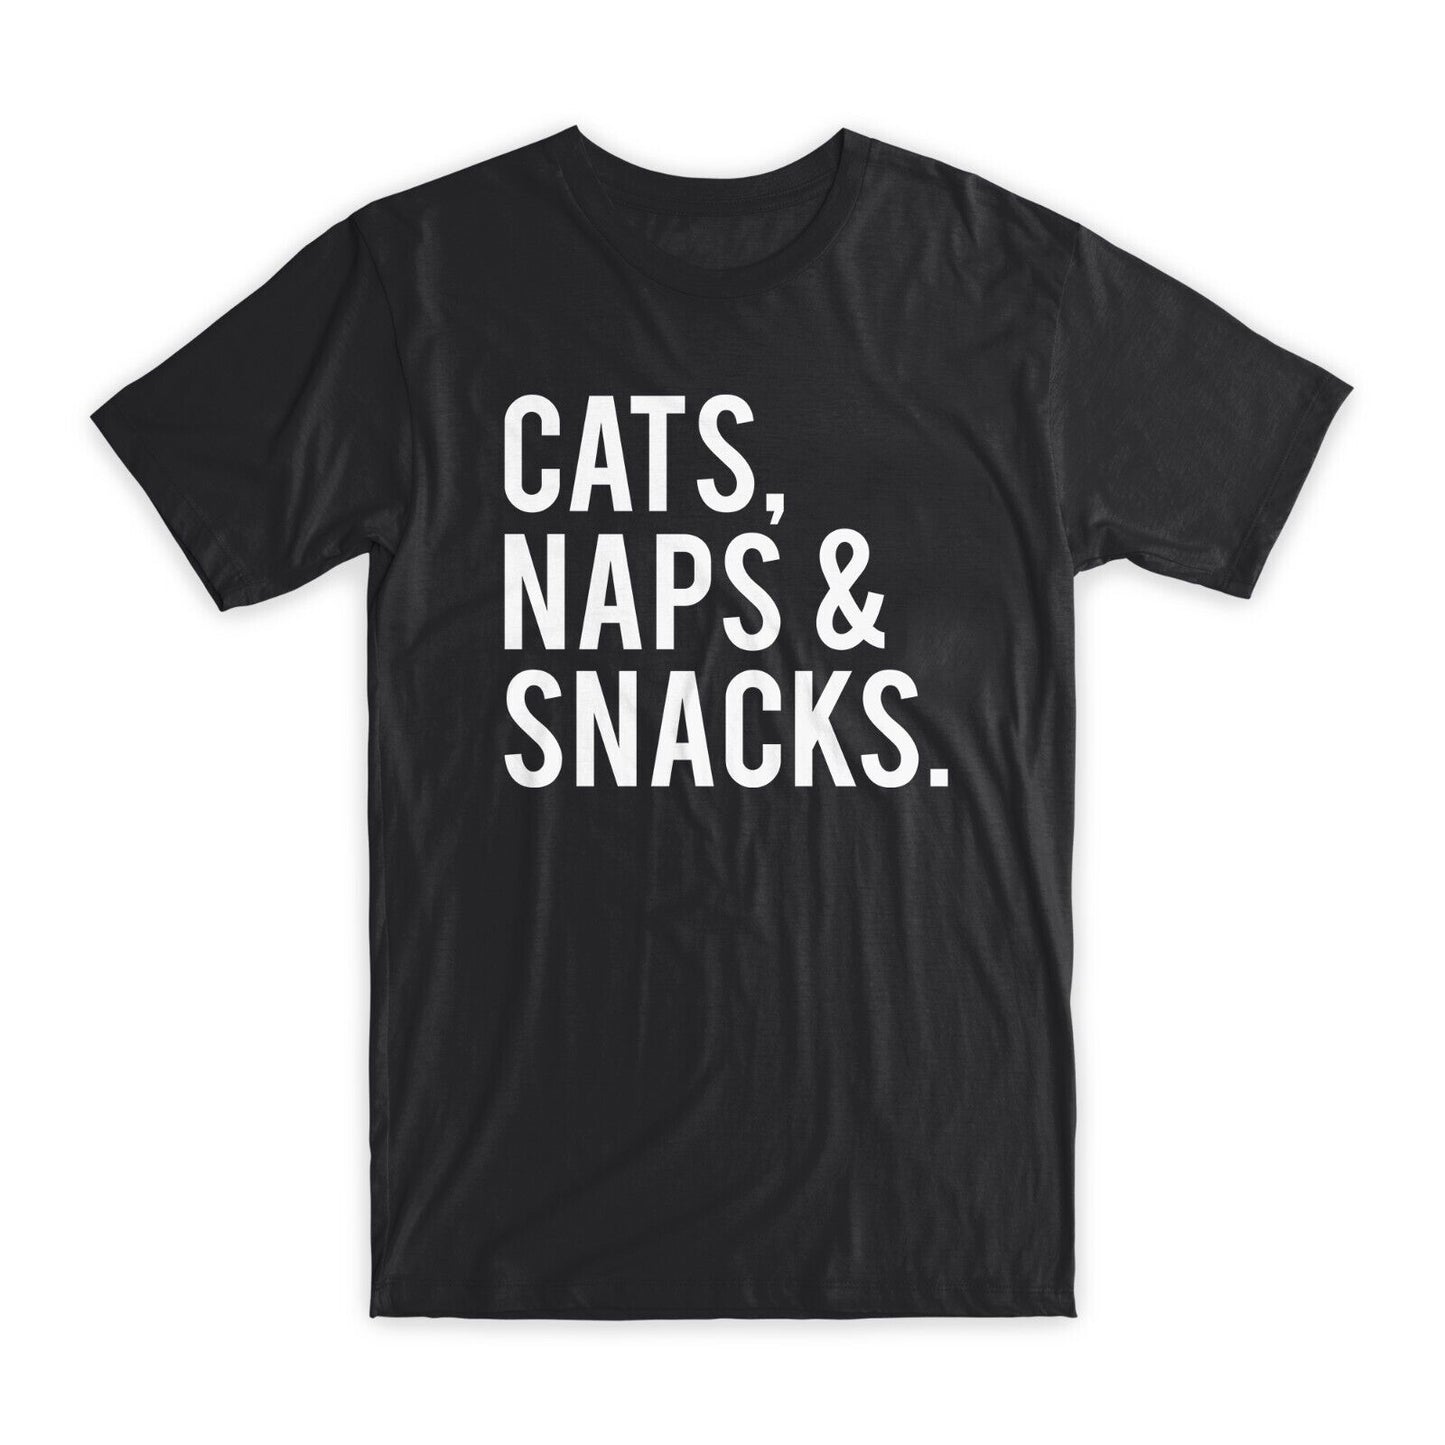 Cats, Naps & Snacks T-Shirt Premium Soft Cotton Crew Neck Funny Tees Gifts NEW